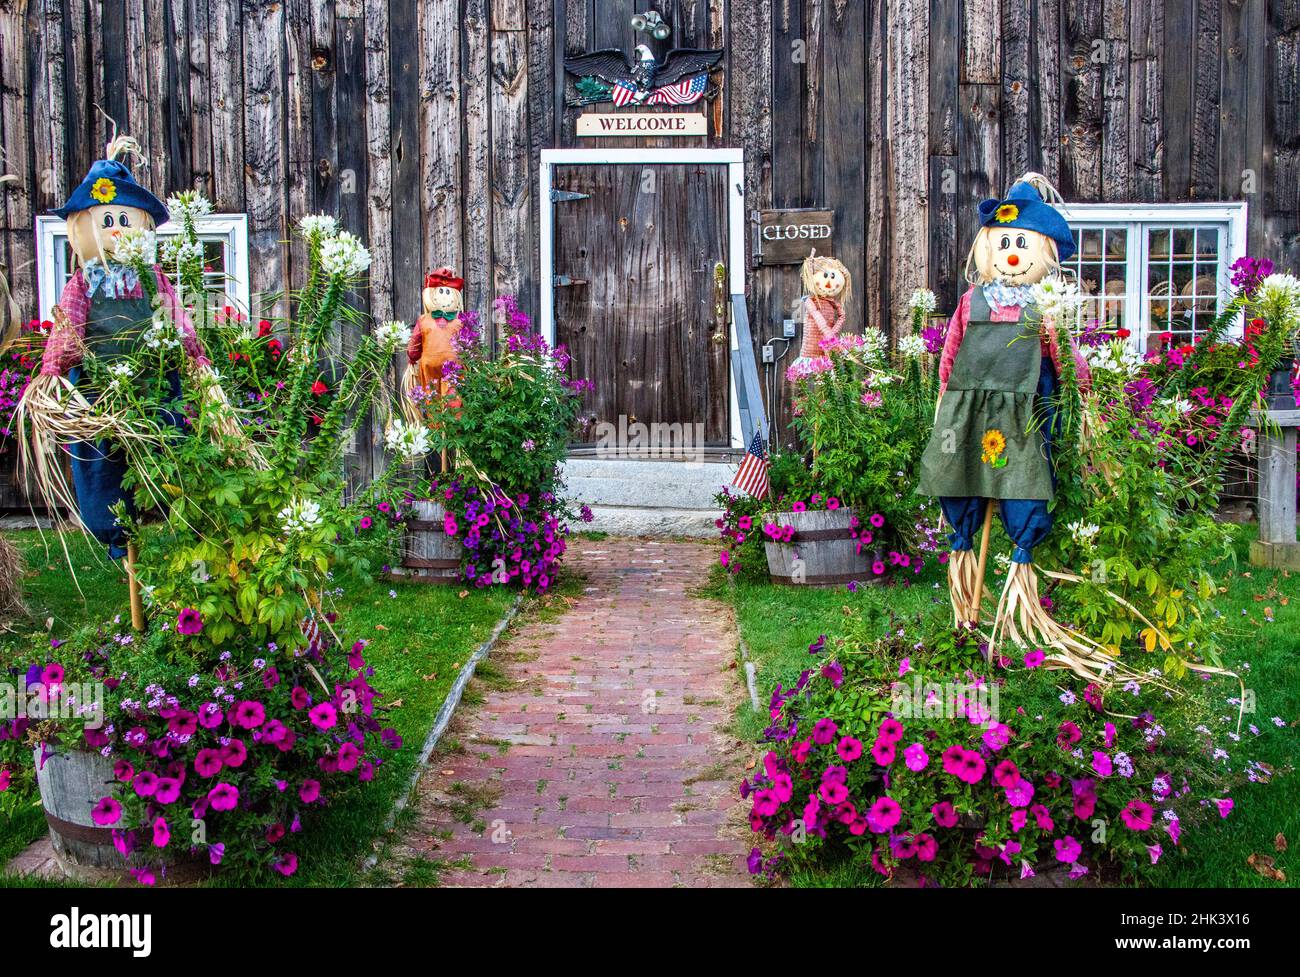 USA, New Hampshire, Sugar Hill with old barn decorated with flowers and theme of Autumn Stock Photo